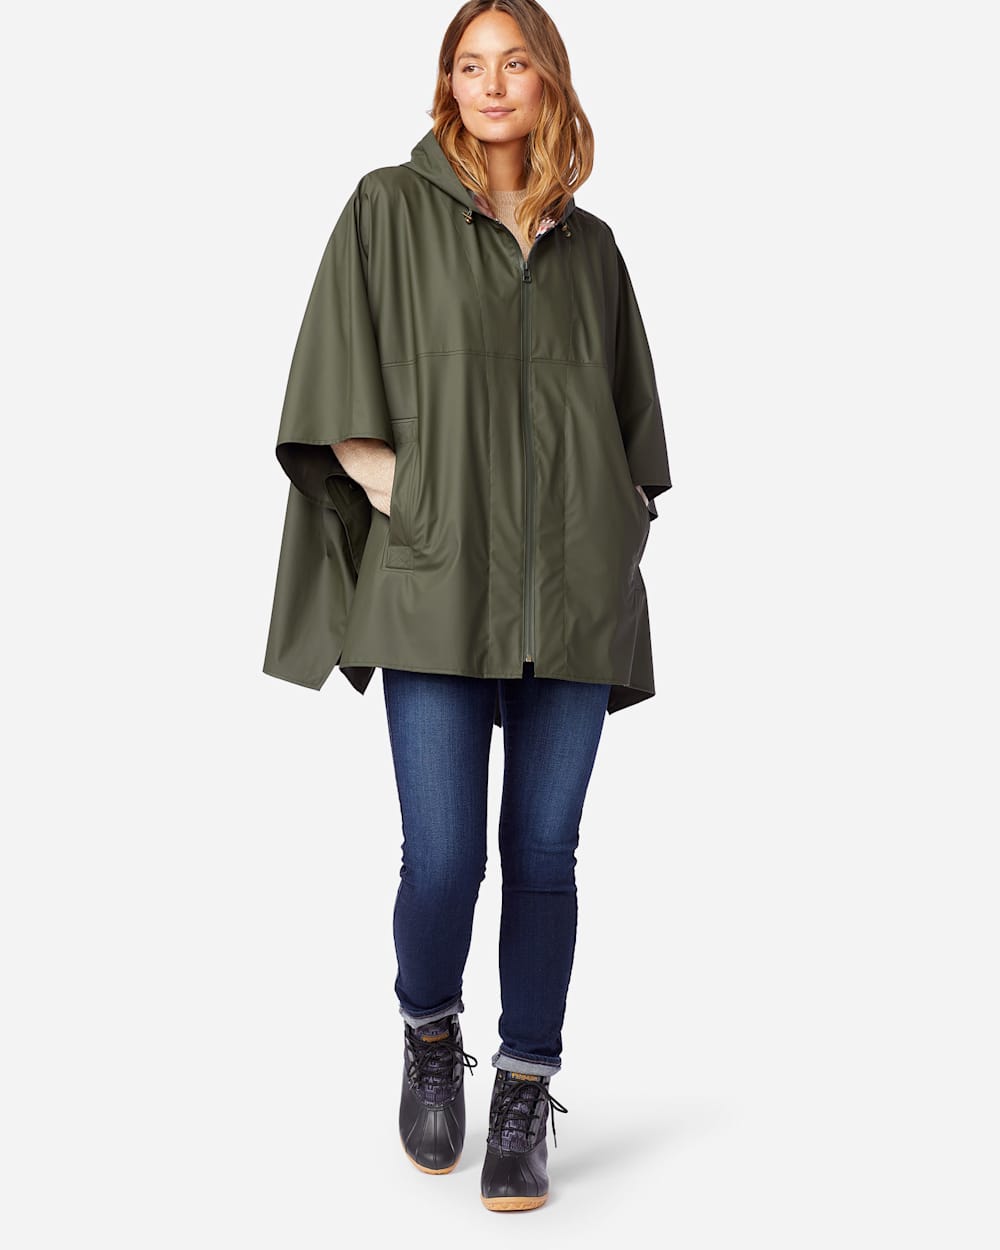 ALTERNATE VIEW OF WOMEN'S ZIP FRONT RAIN PONCHO IN OLIVE image number 3